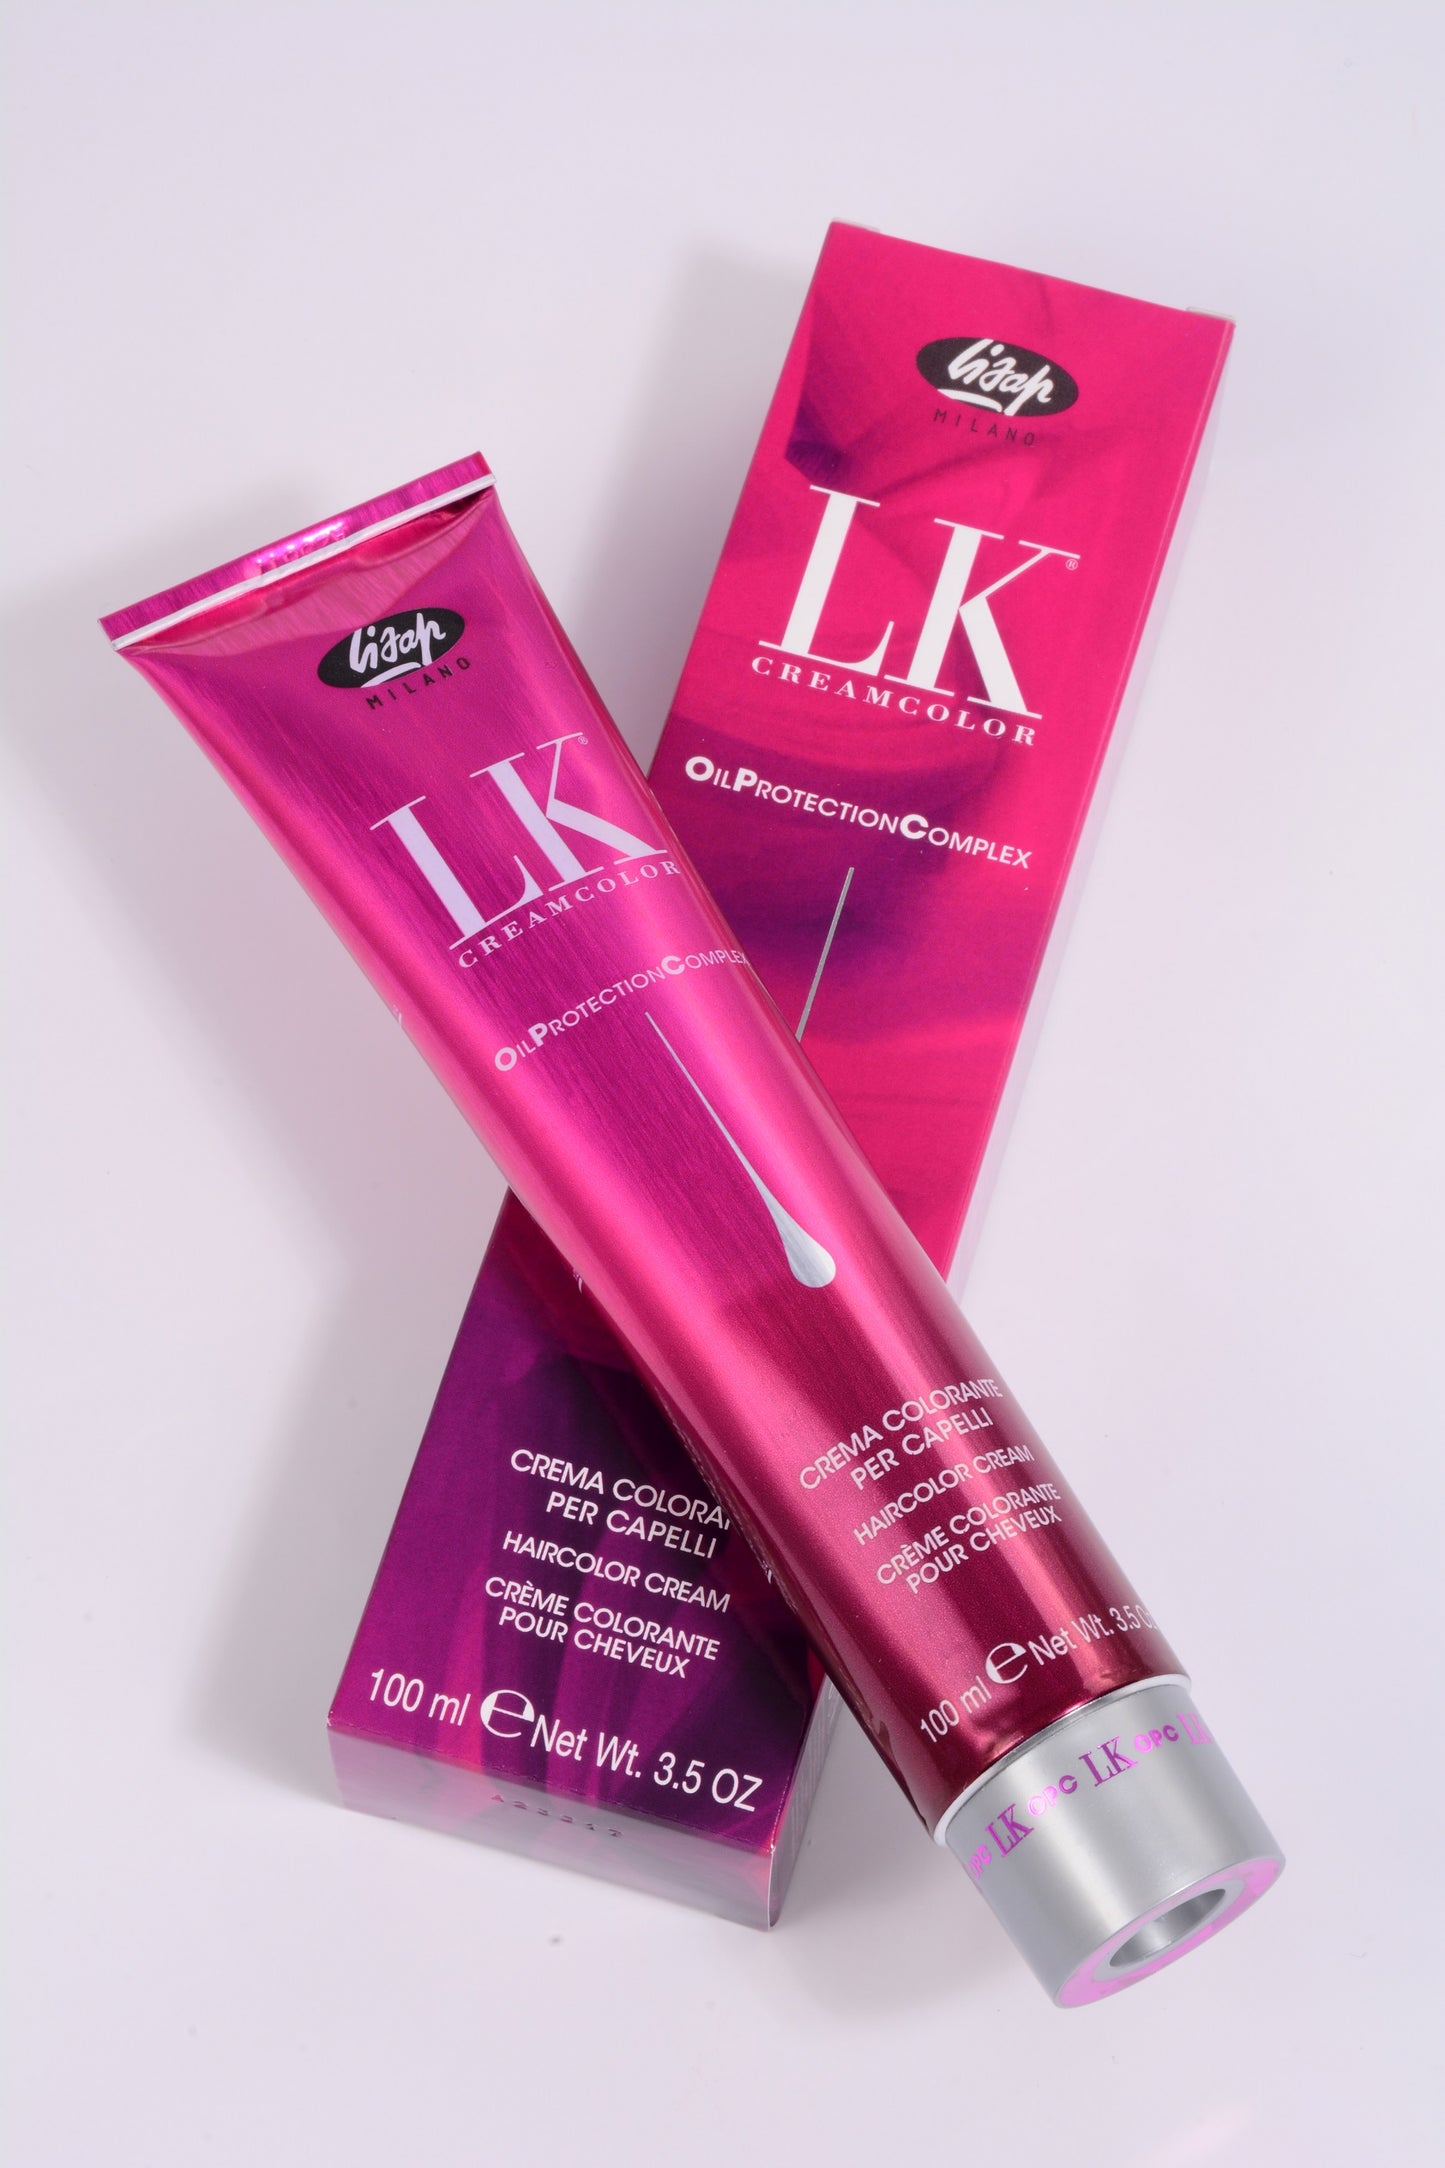 LK Creamcolor 4/48 Oil Protection Complex